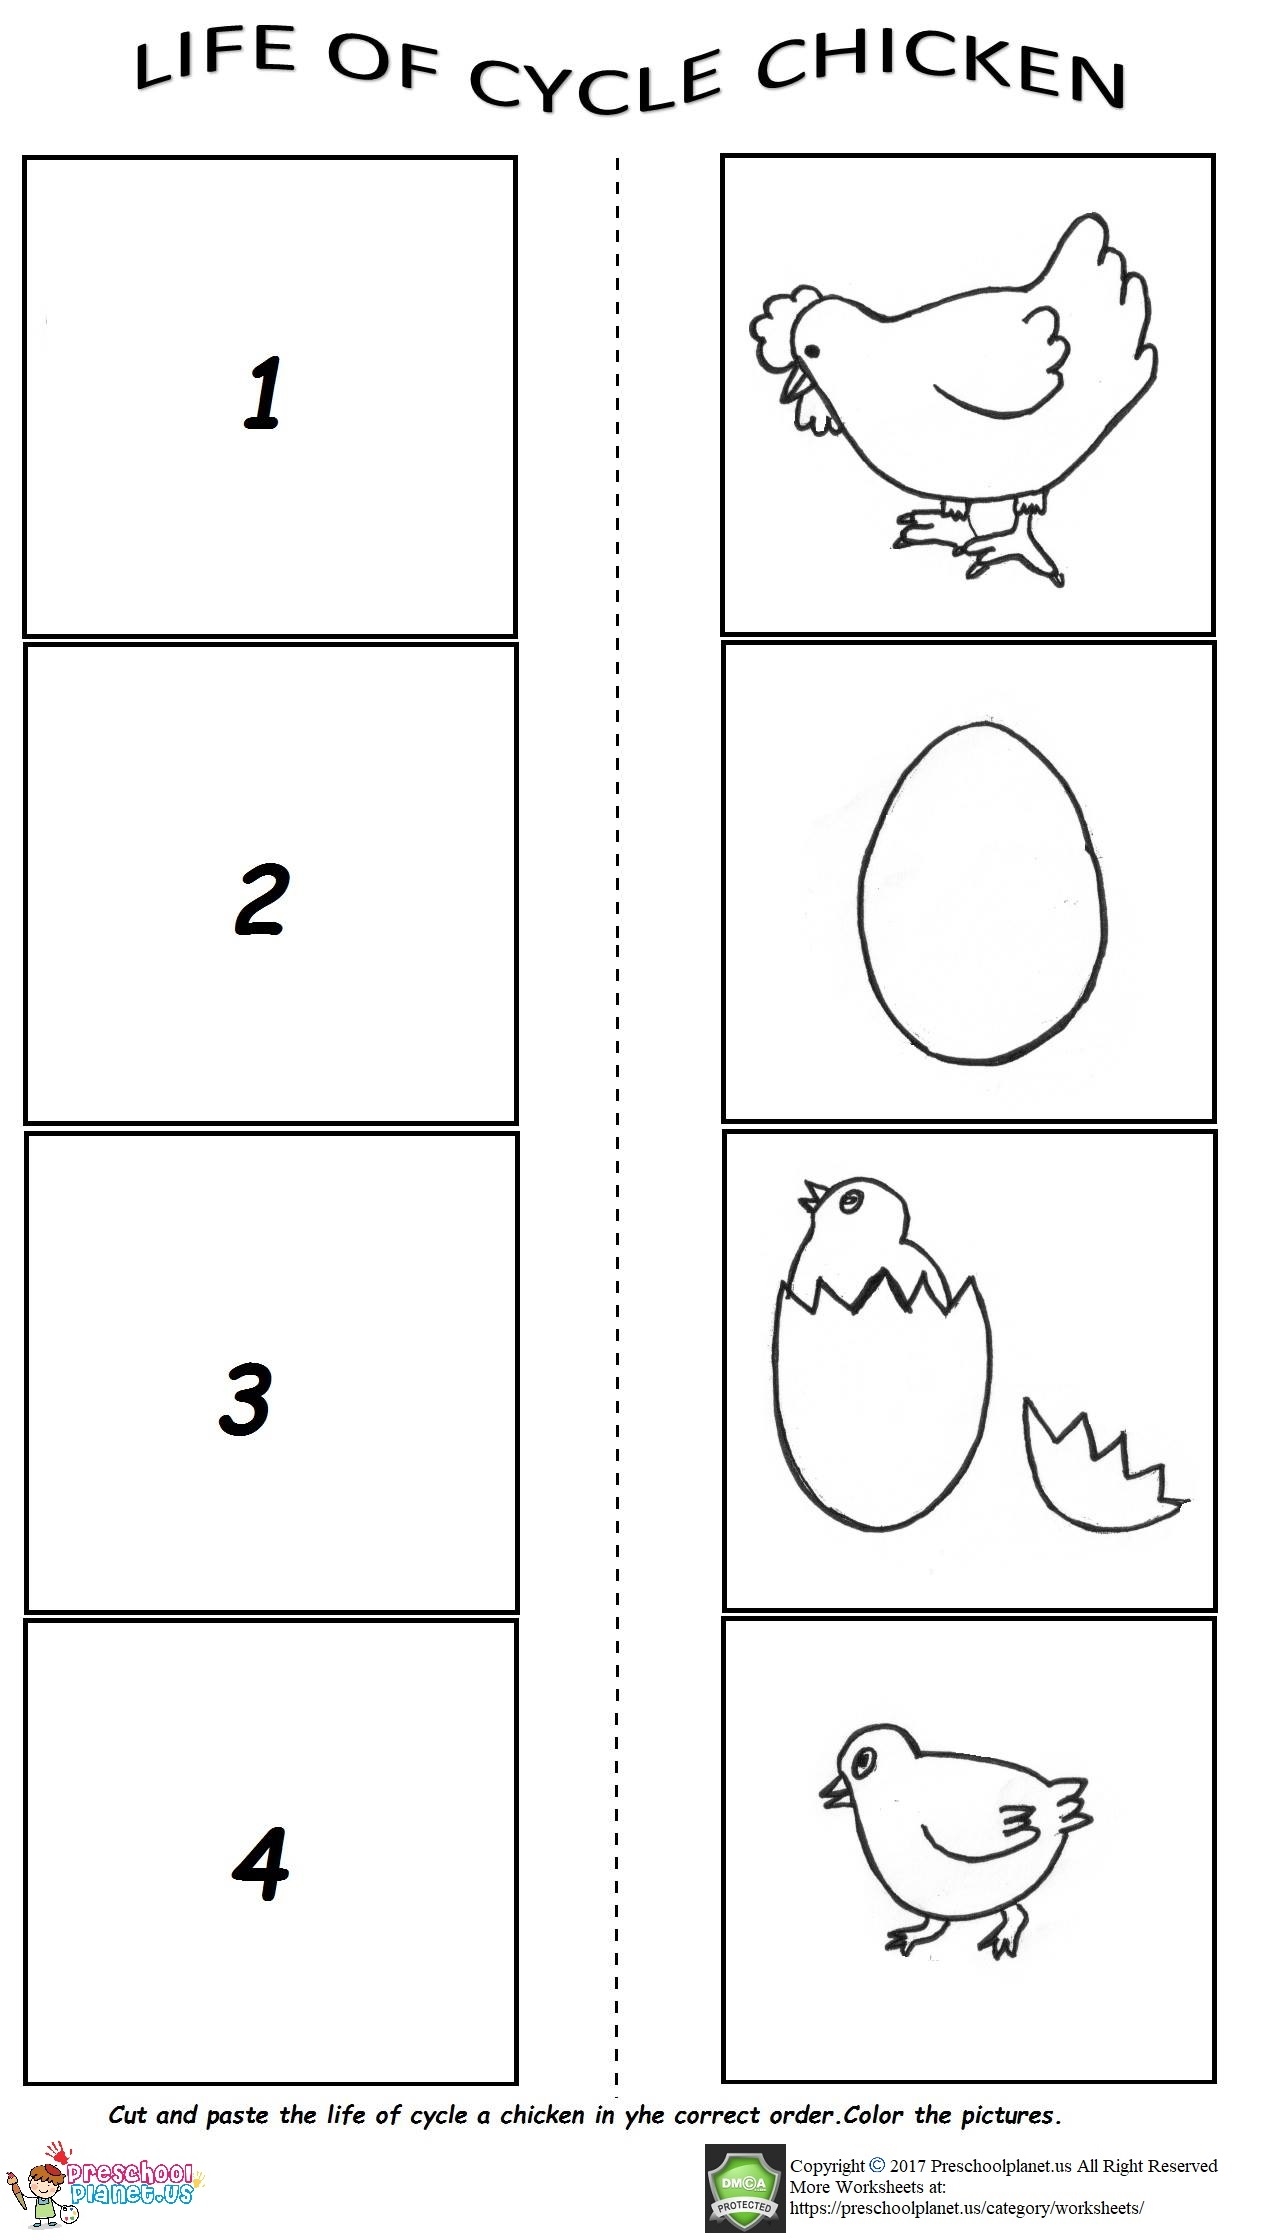 The Life Cycle Of A Chicken Worksheet Preschoolplanet